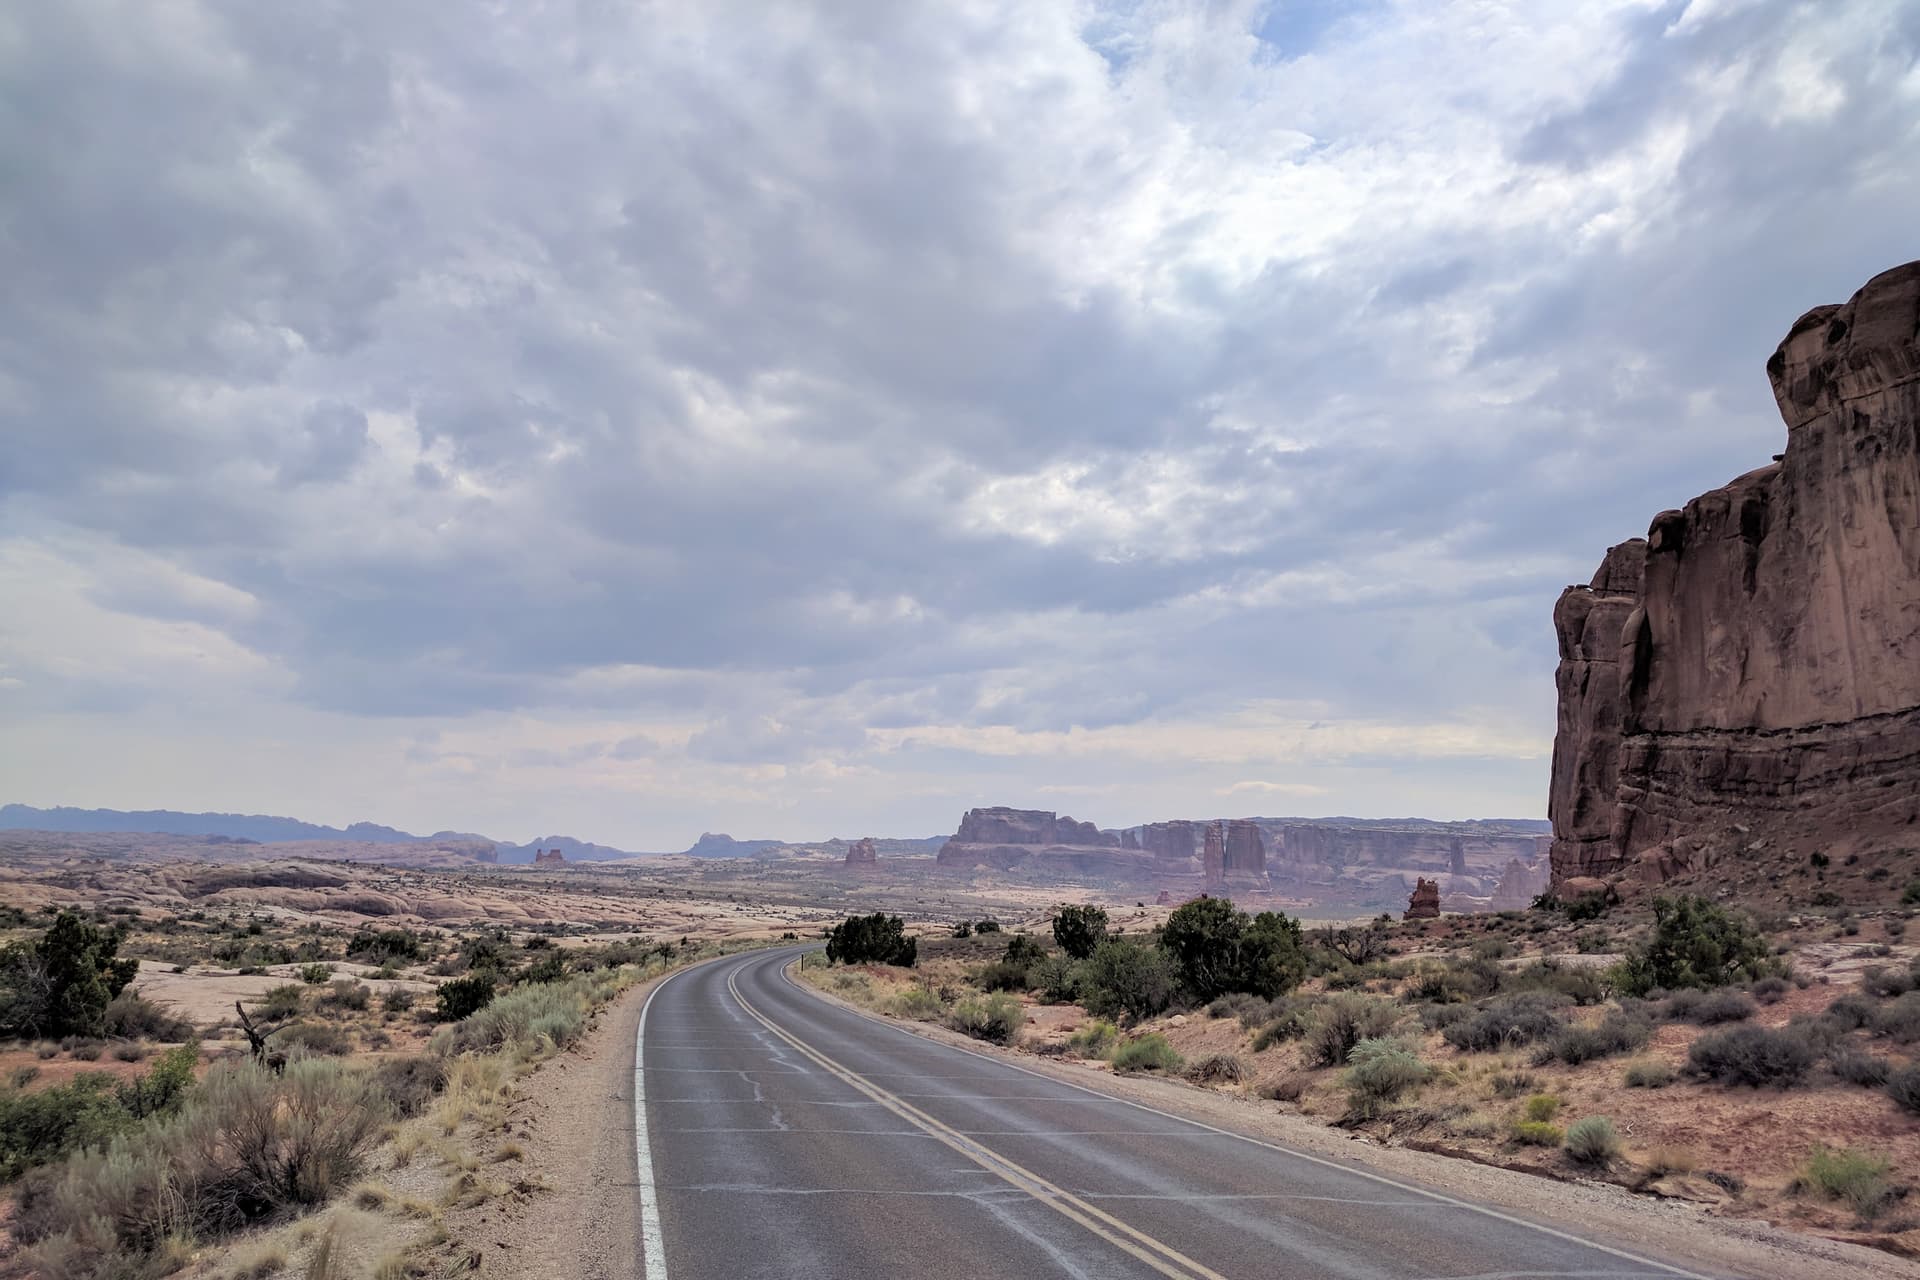 Looking south back along the main road into Arches National Park. In the distance, massive fins of red sandstone.